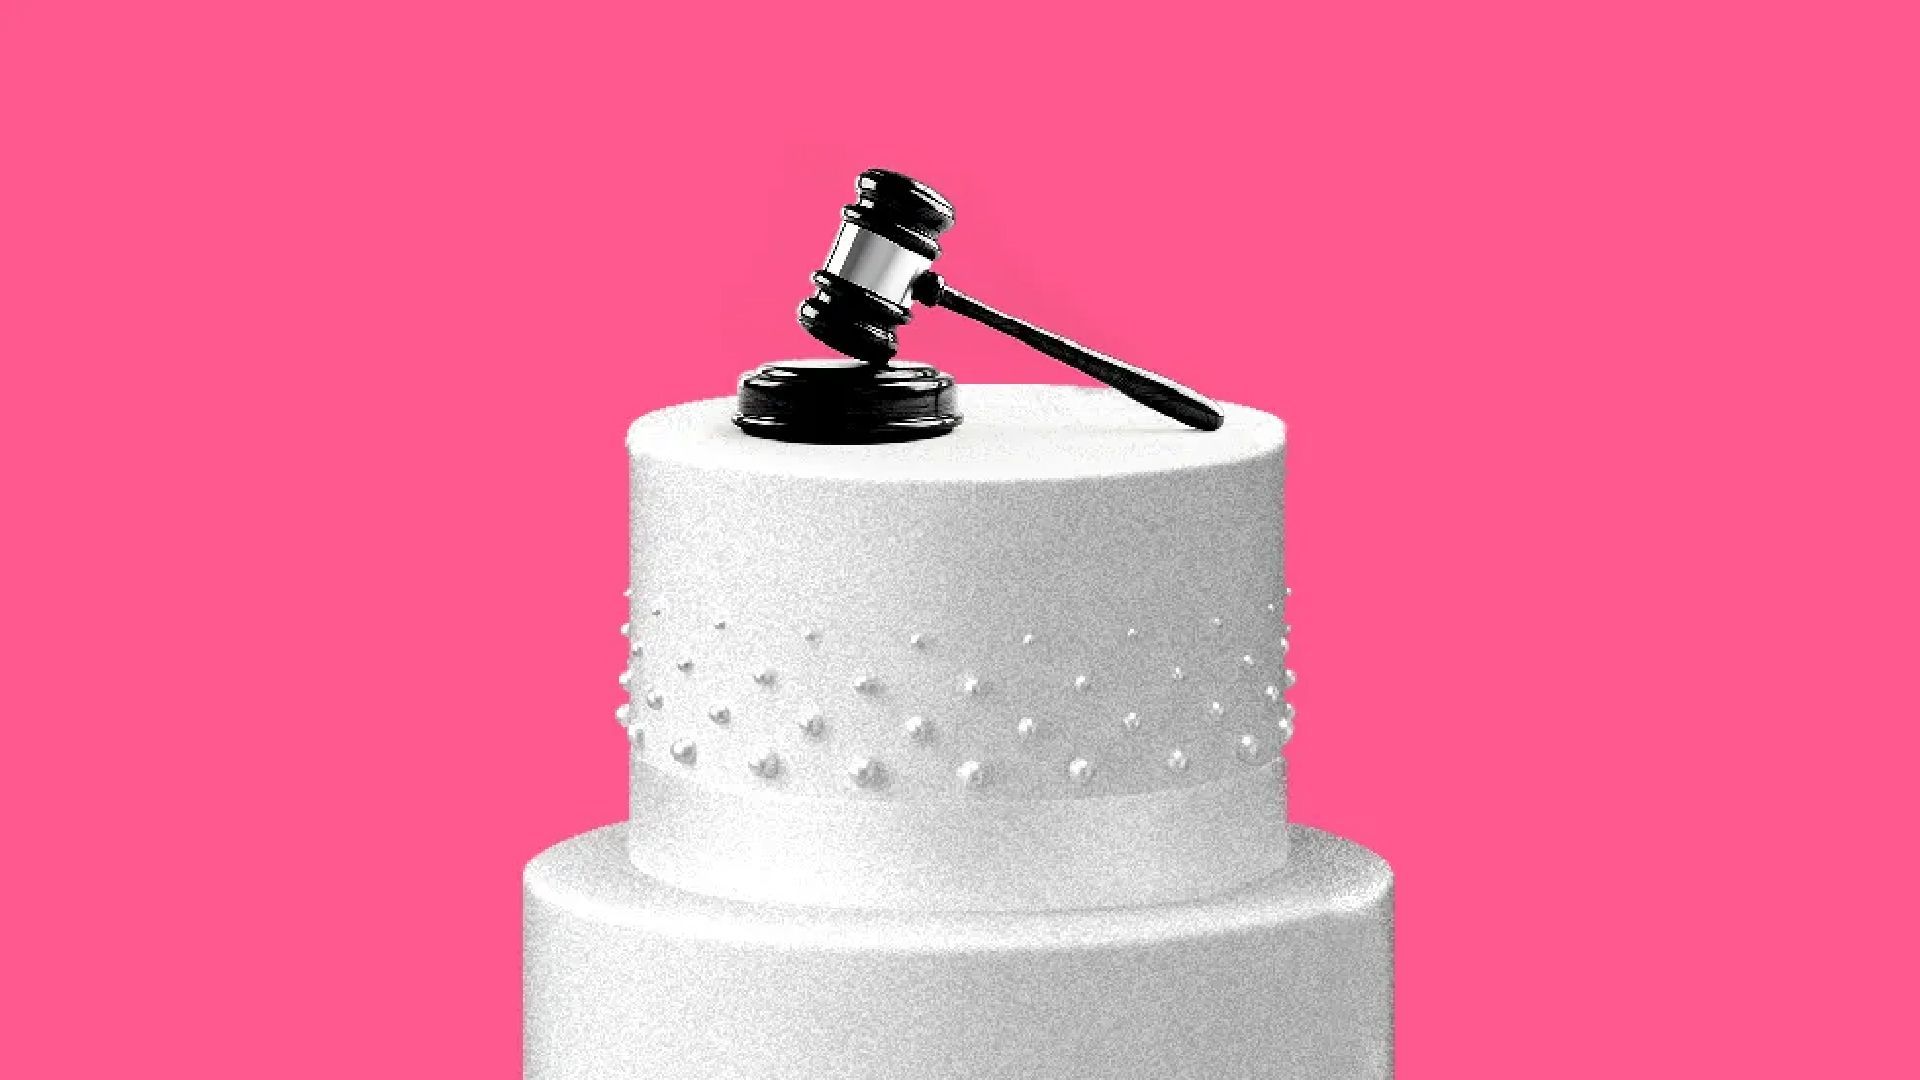 Illustration of a gavel on top of a wedding cake.